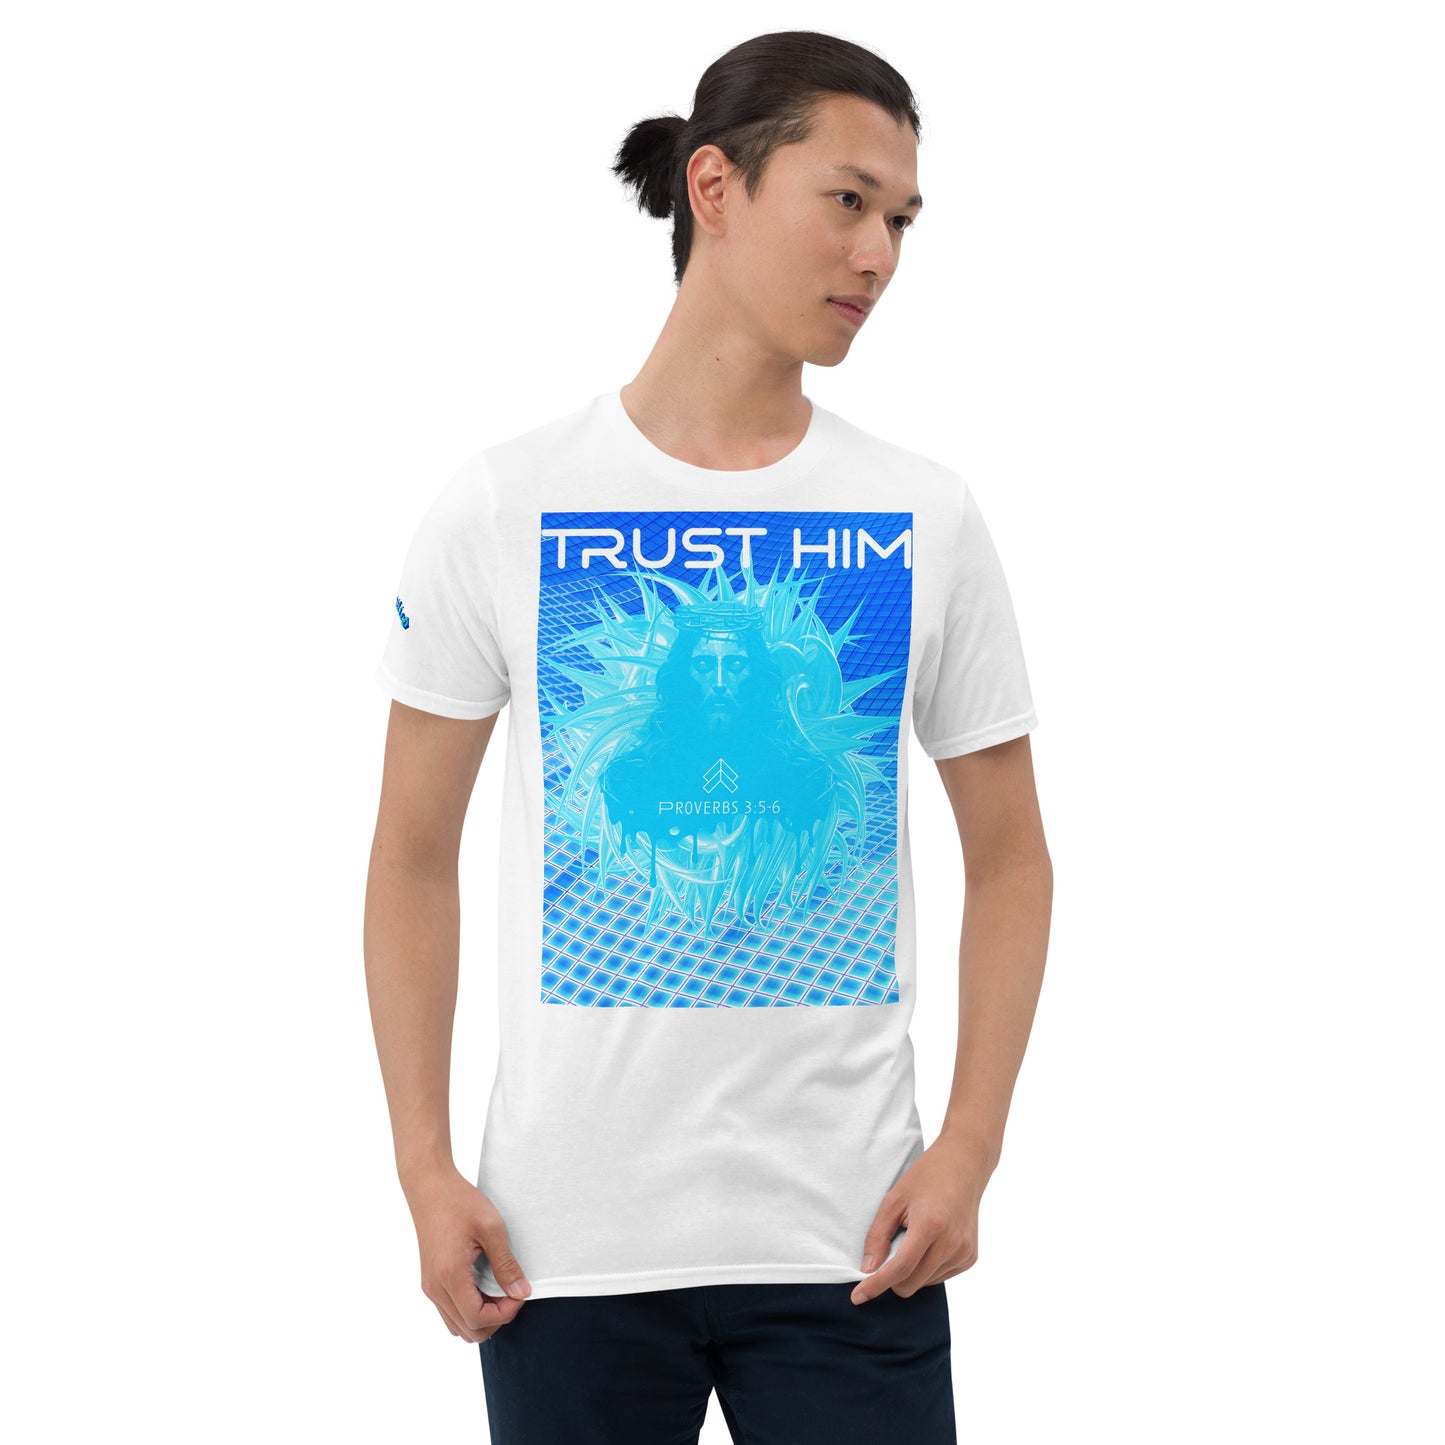 TRUST IN THE LORD- Short-Sleeve Unisex T-Shirt